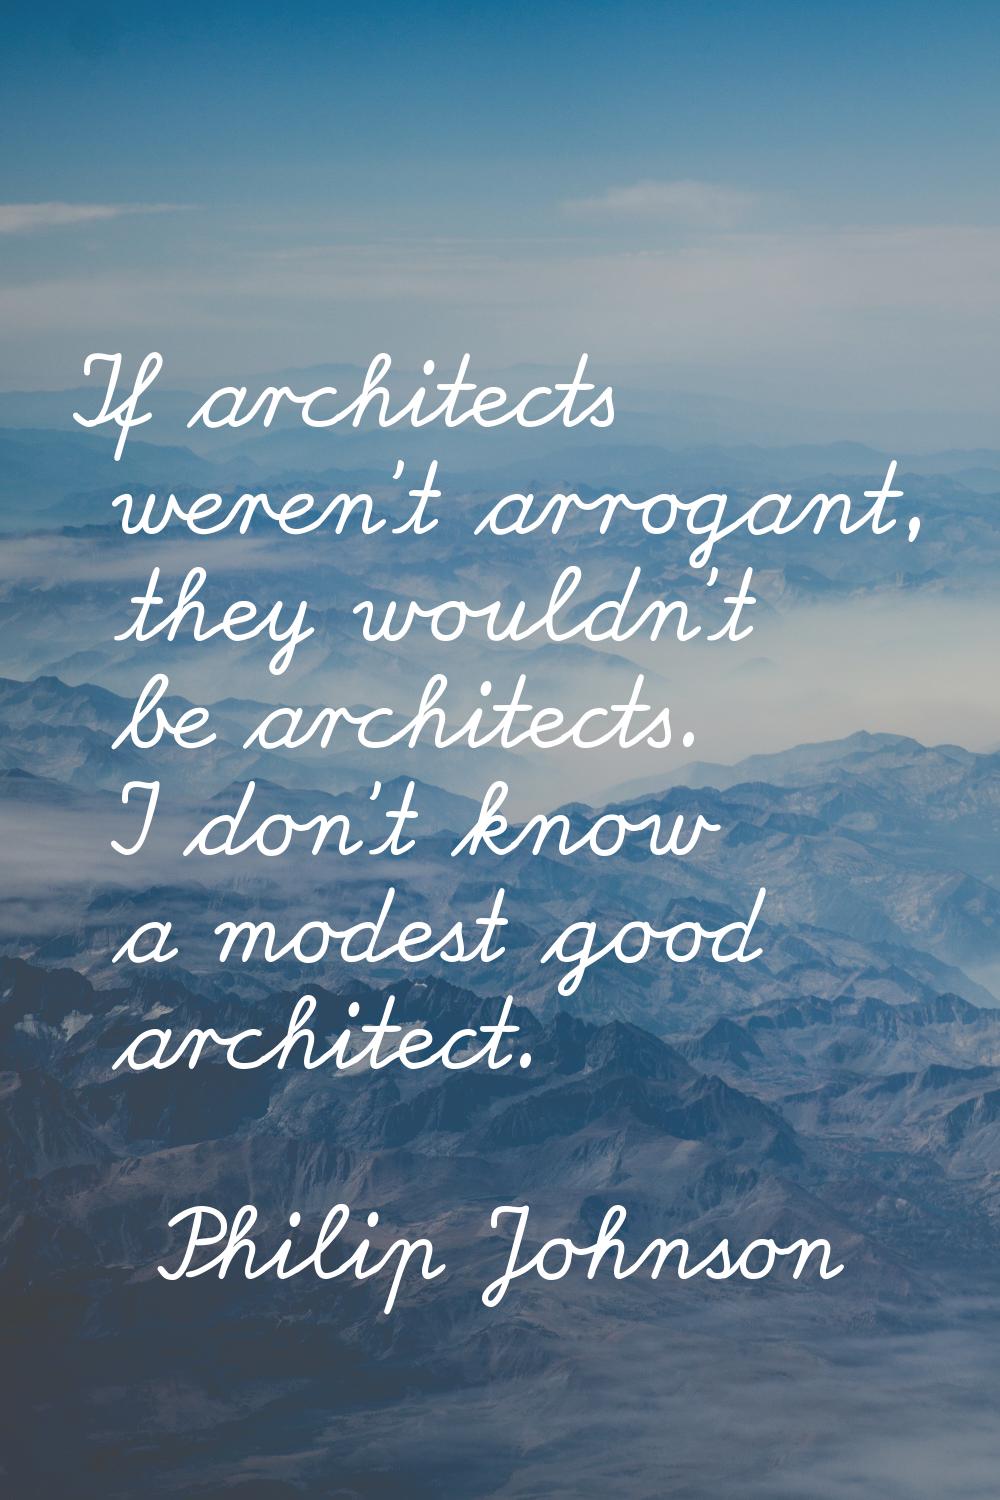 If architects weren't arrogant, they wouldn't be architects. I don't know a modest good architect.